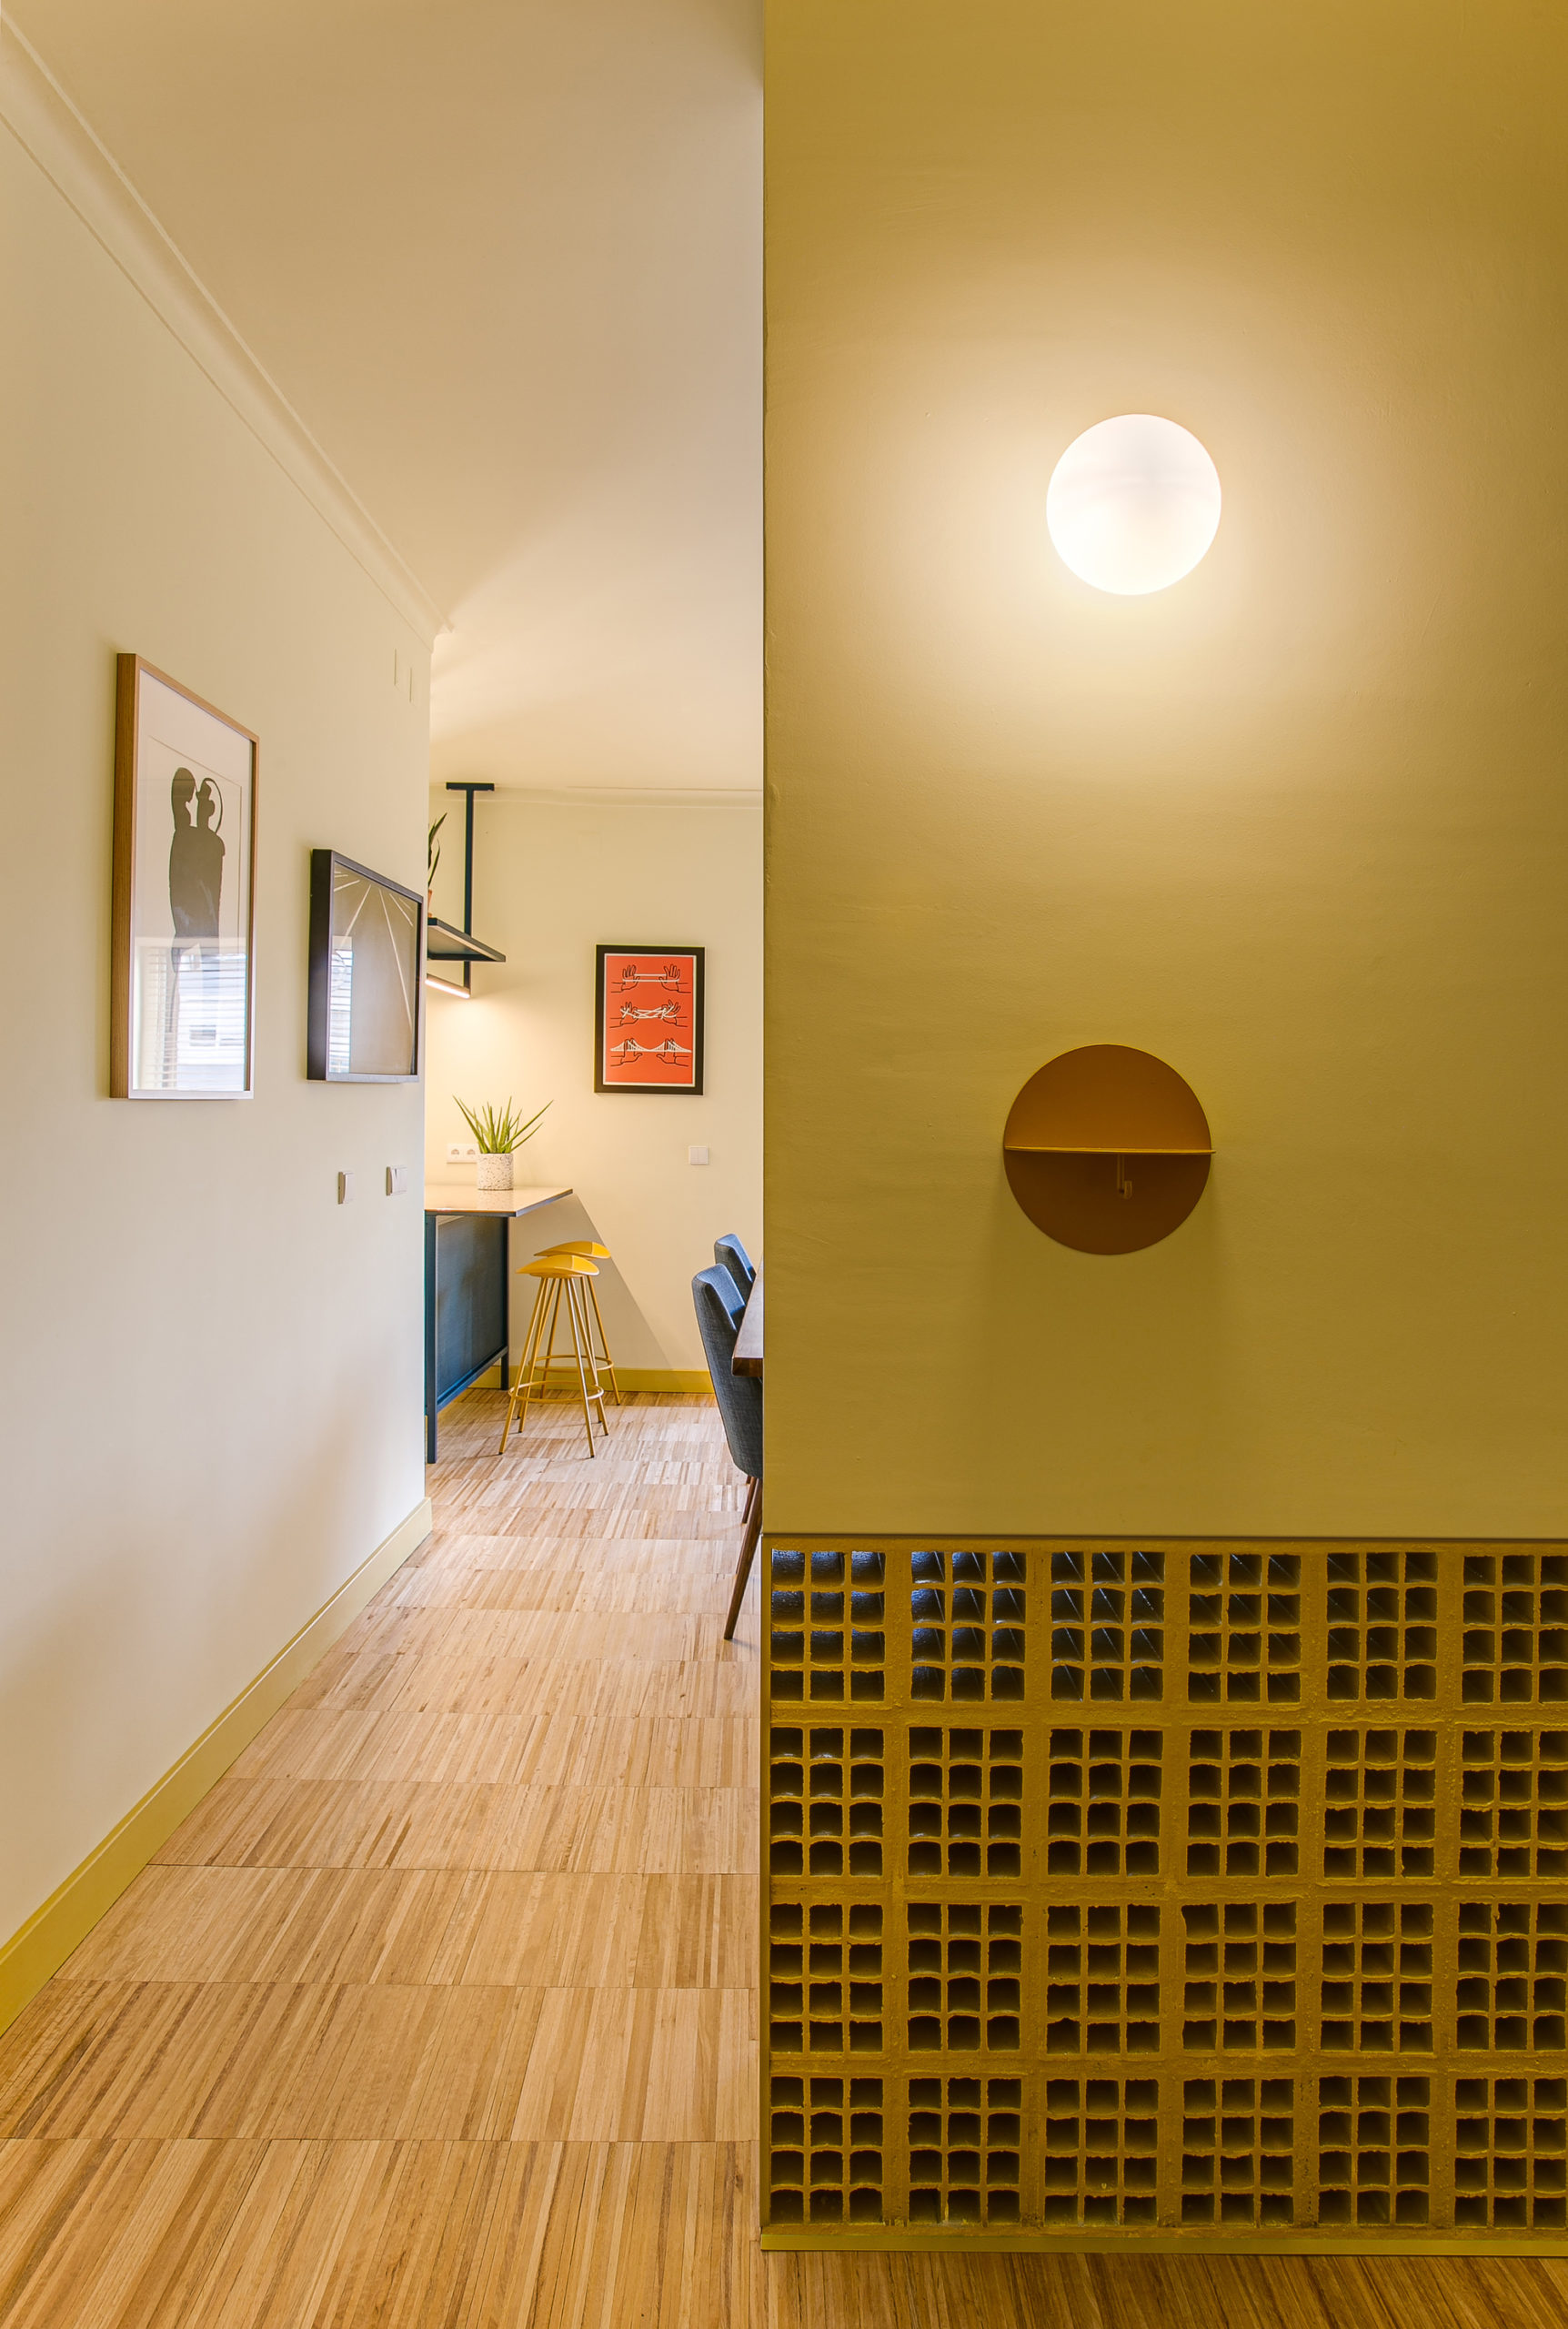 Revamped-interior-of-old-apartment-in-Portugal-with-wooden-floors-and-bright-yellow-walls-91438-scaled